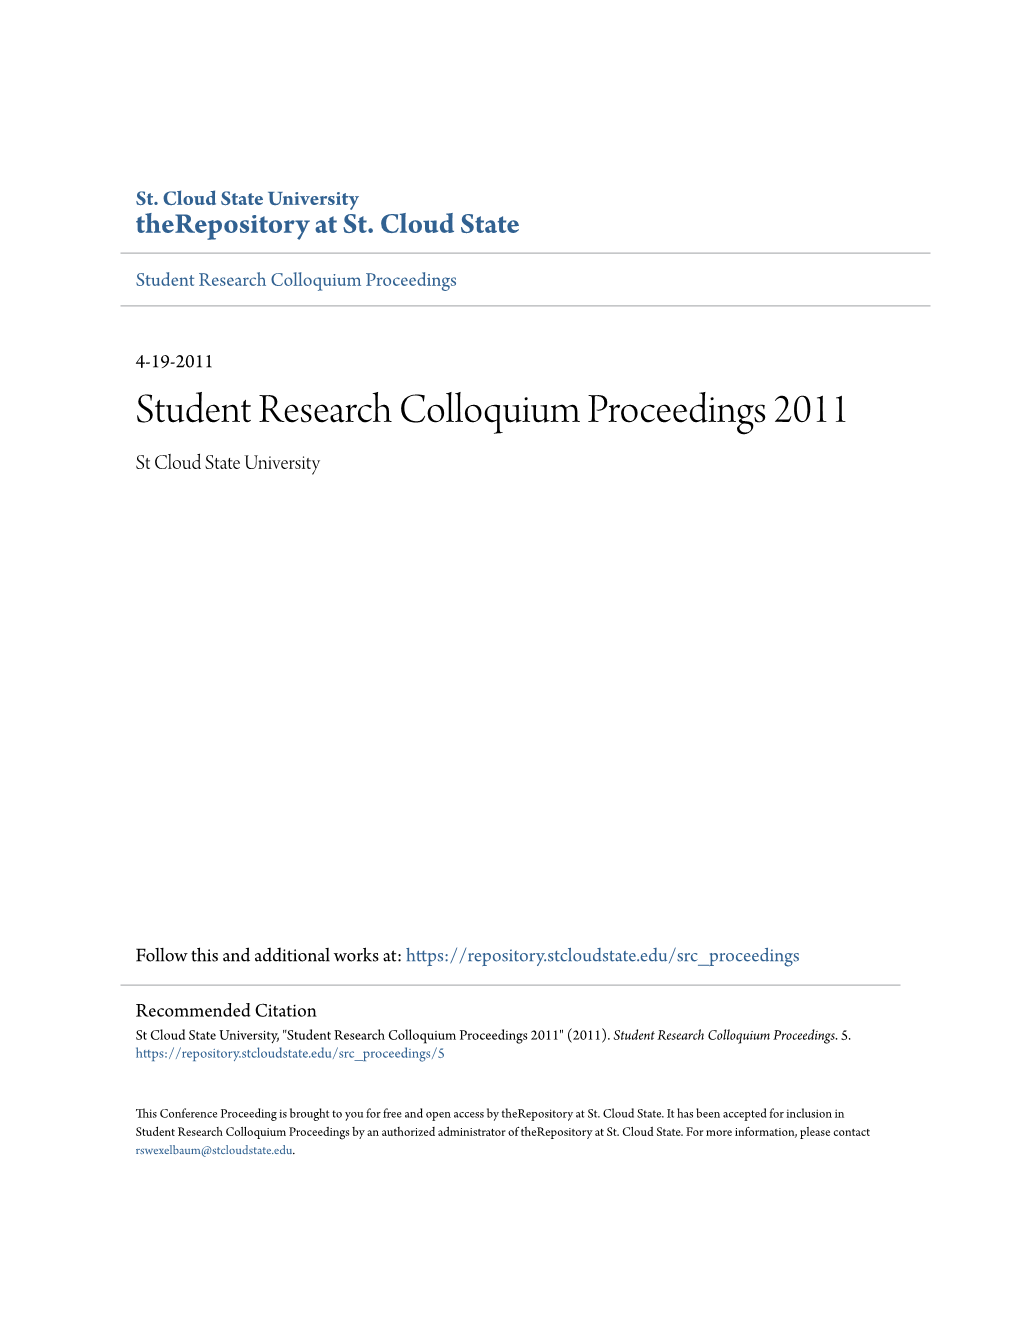 Student Research Colloquium Proceedings 2011 St Cloud State University